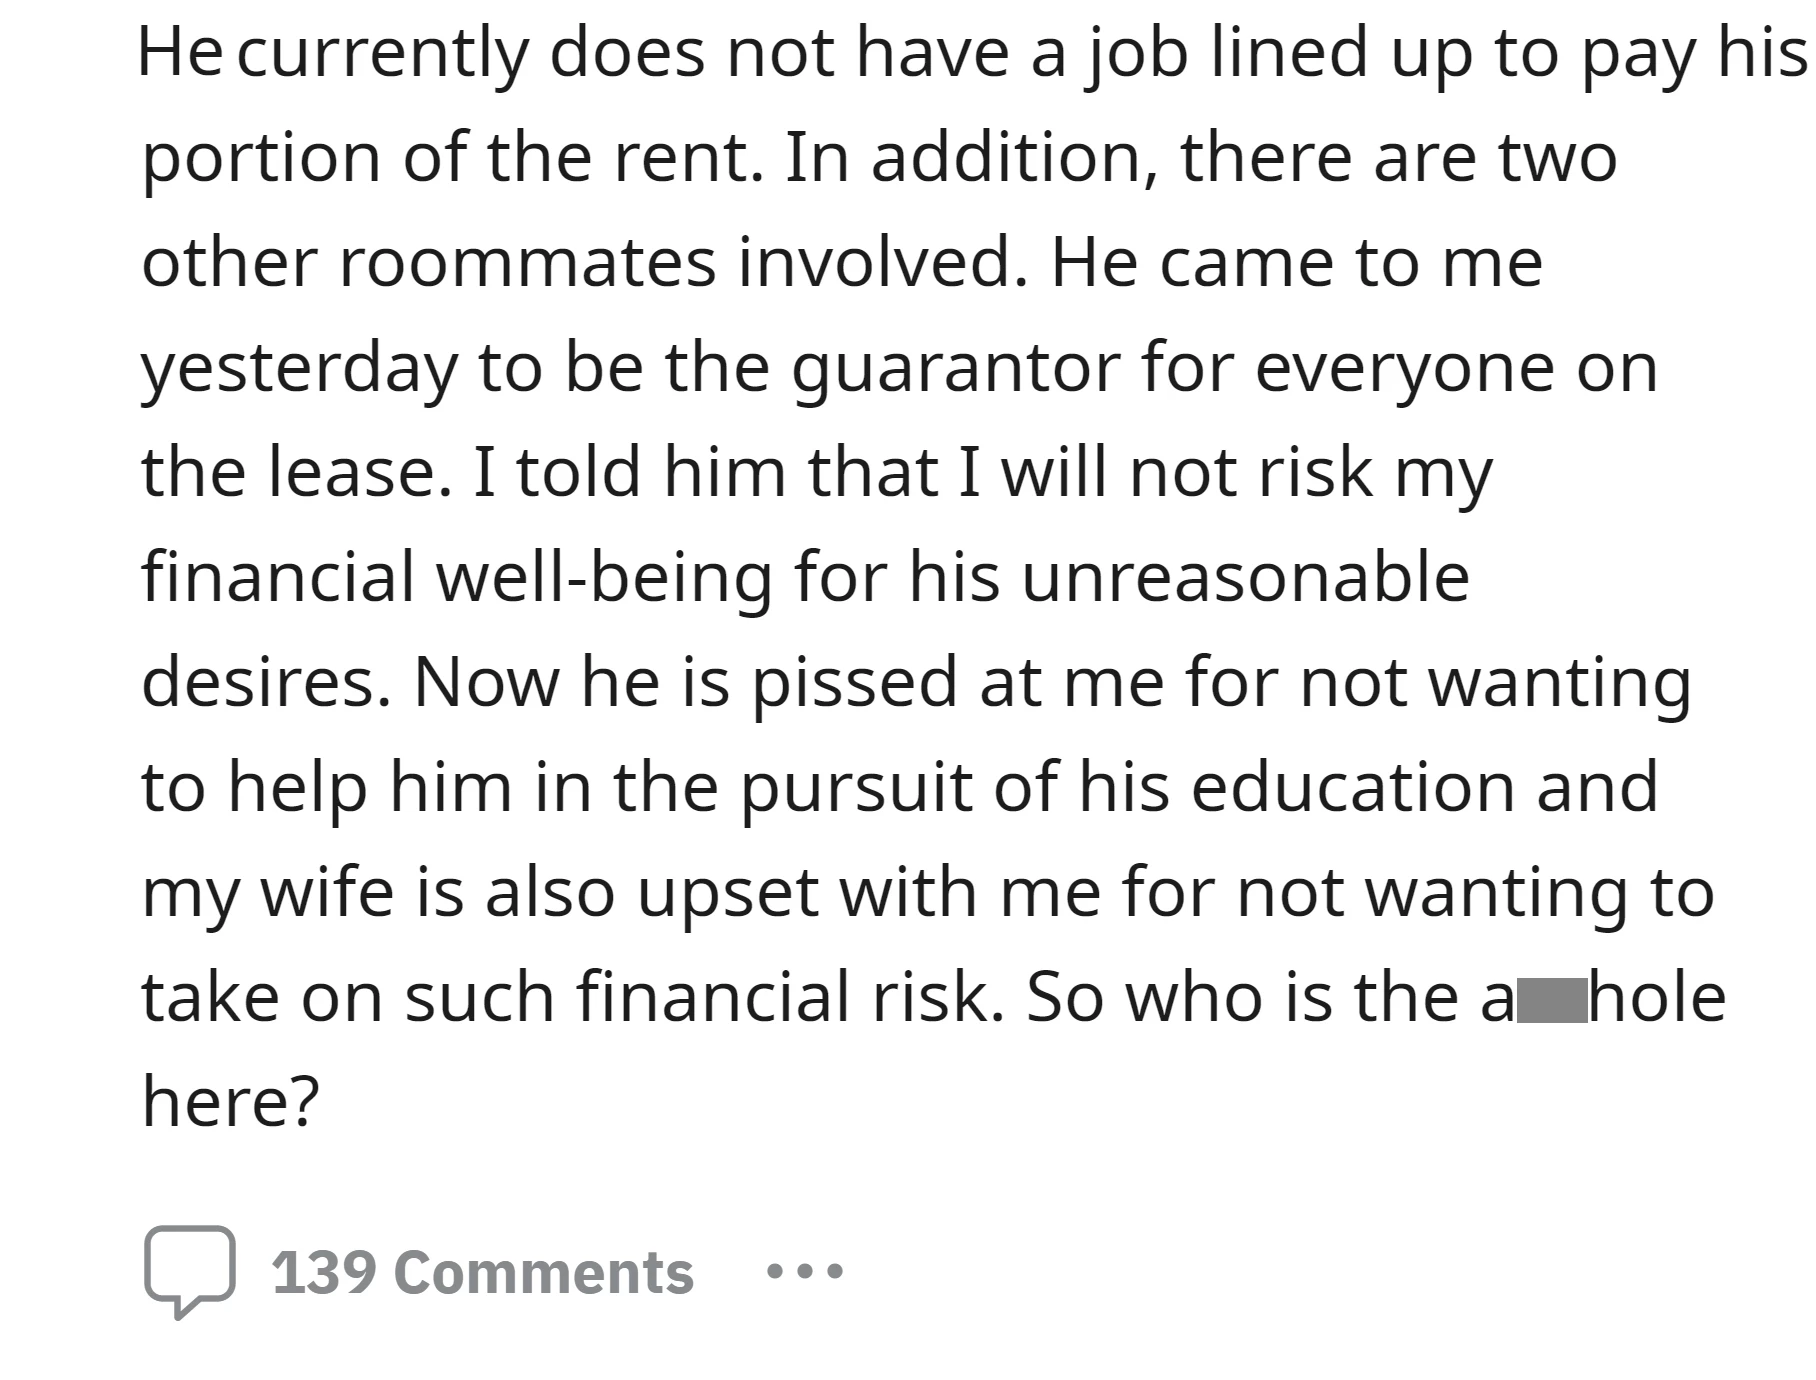 OP's son wanted the OP to be the lease guarantor for his accommodation, but the OP declined